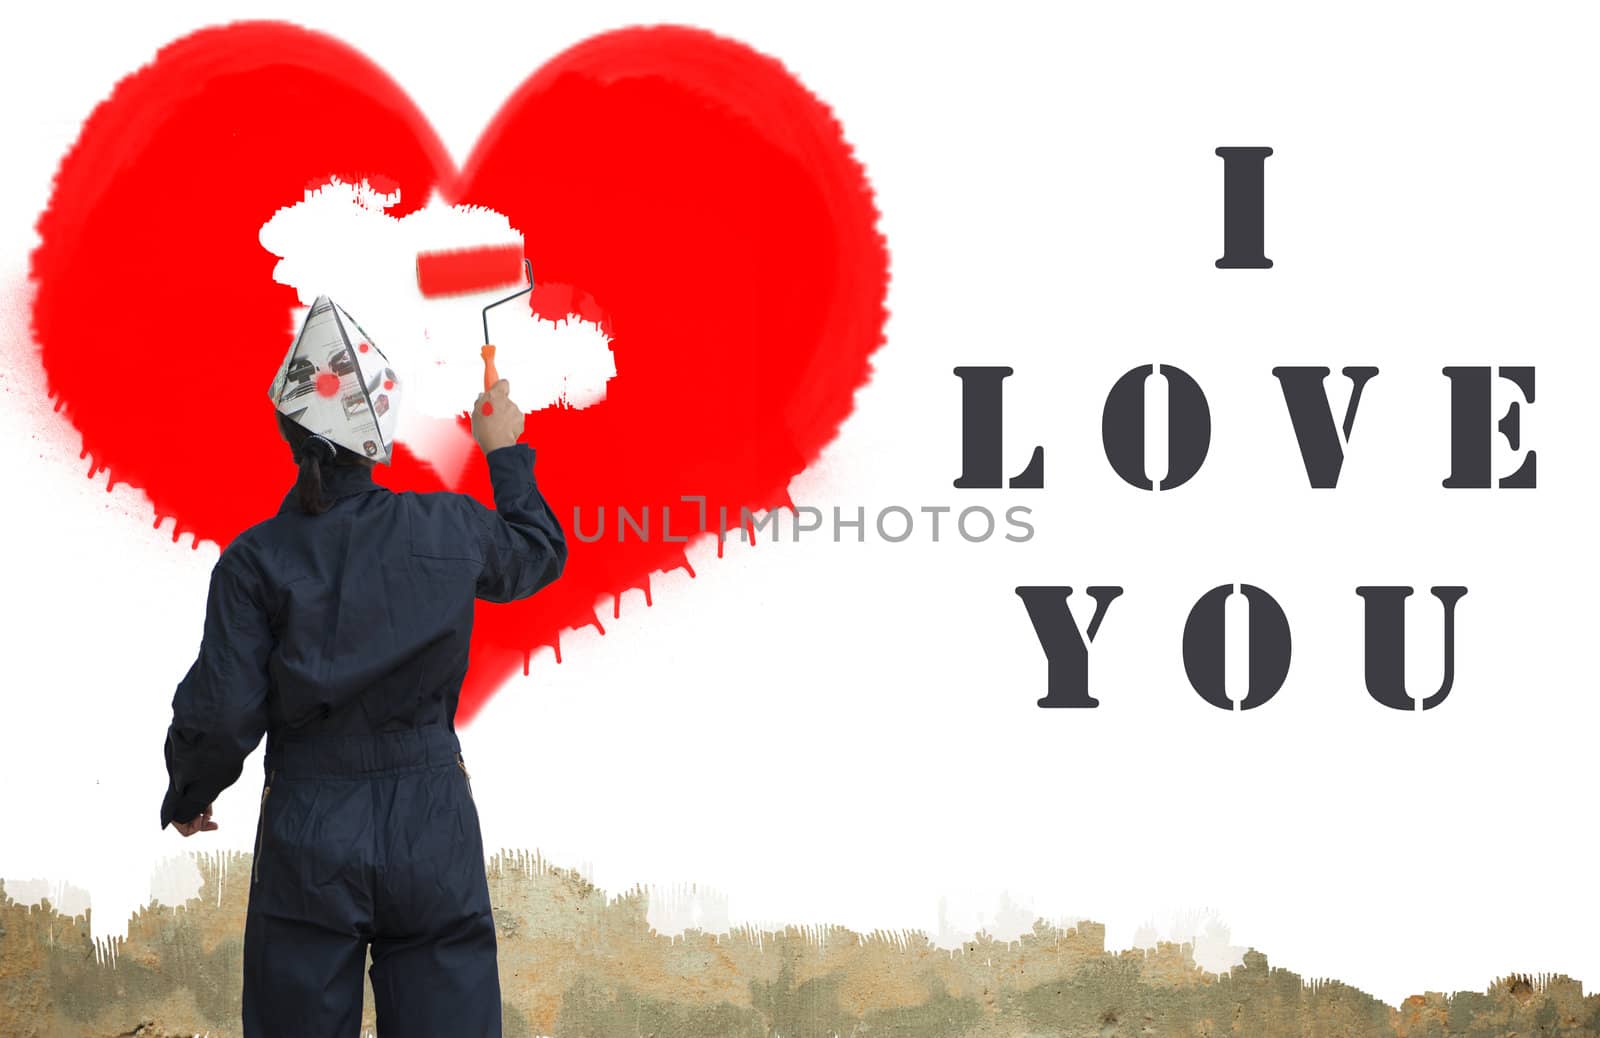 I Love you by p.studio66